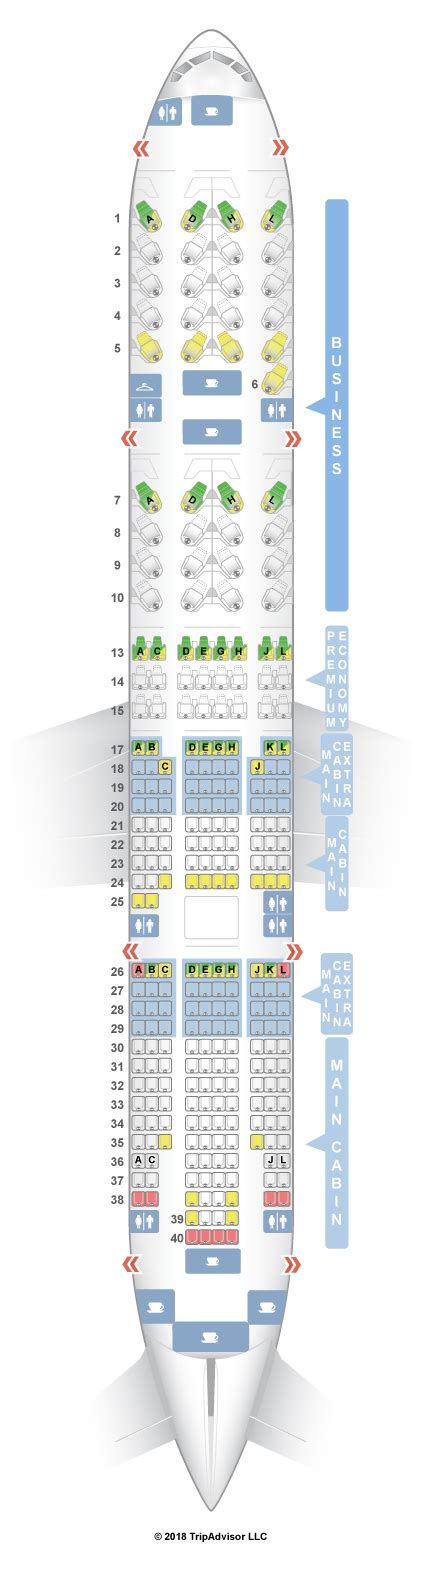 boeing 777-200 seat map american